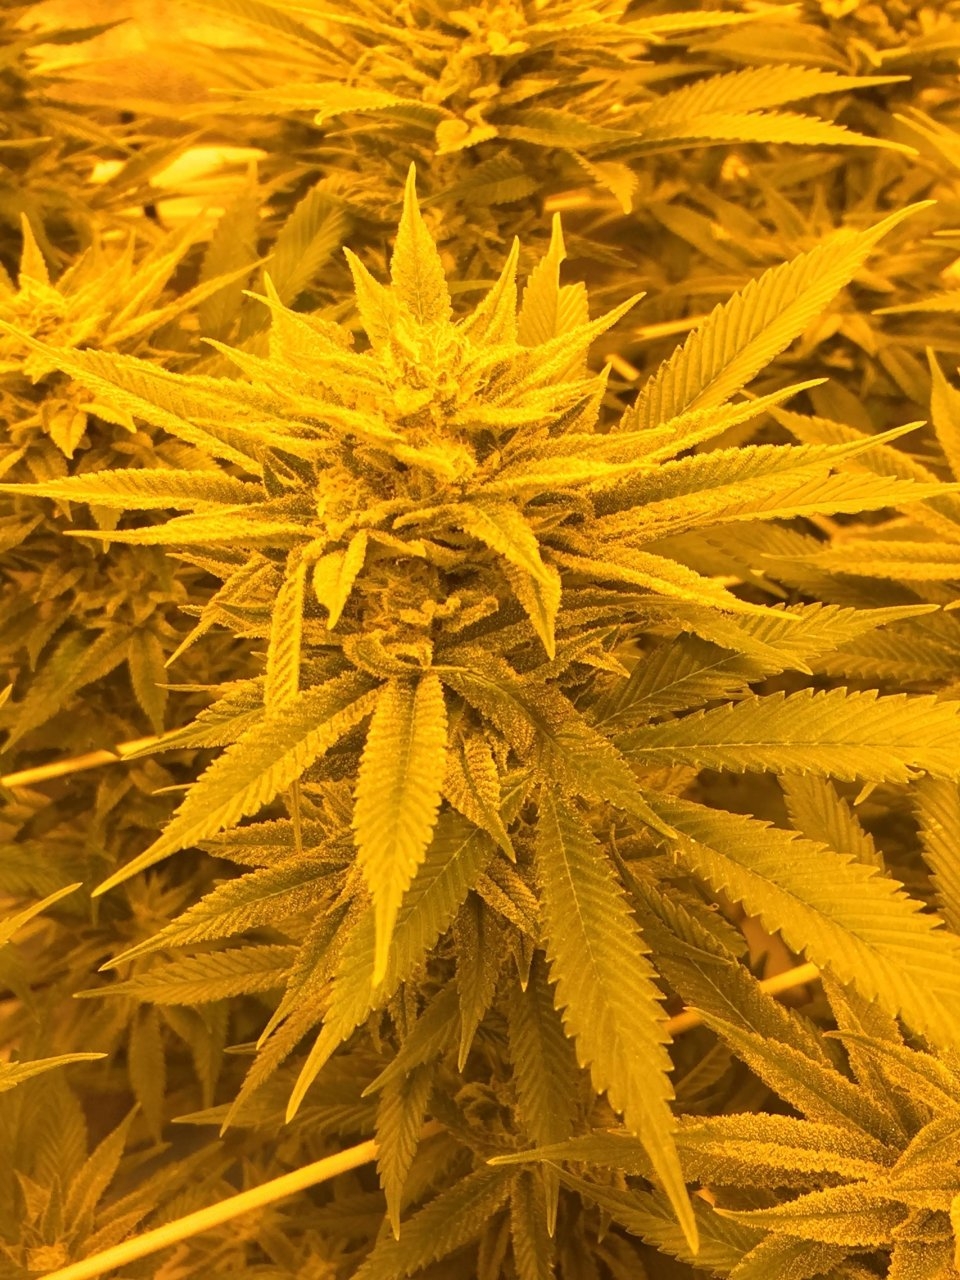 GG4 starting to frost